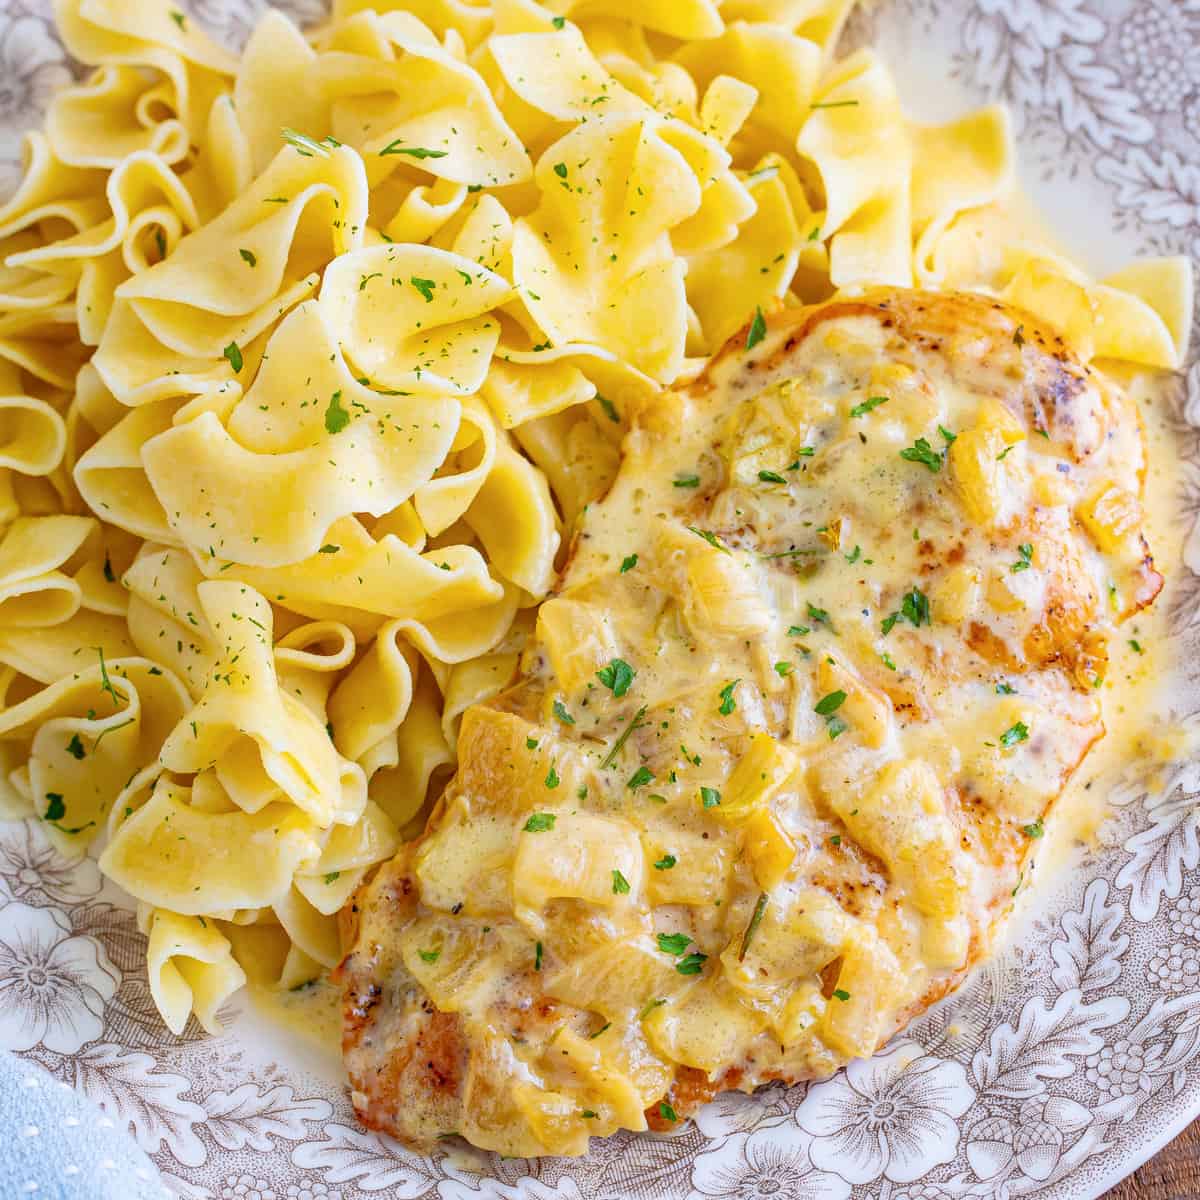 Looking down on a plate of Creamy Garlic Chicken with pasta.